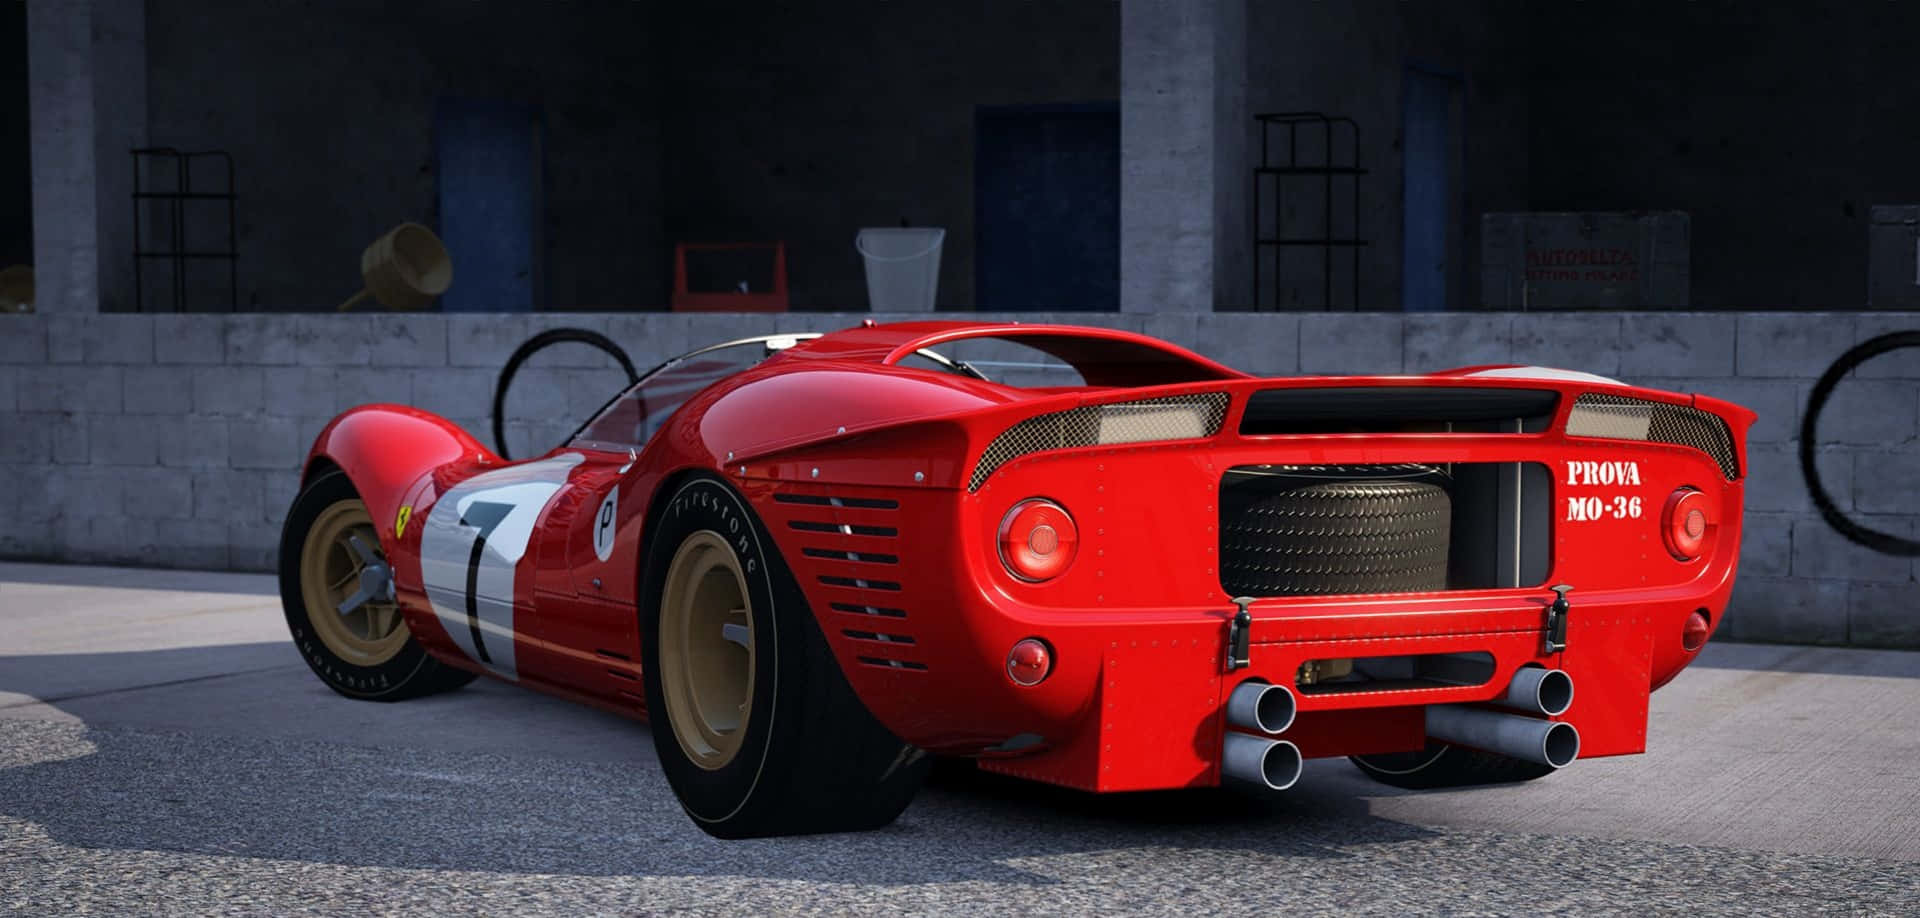 Ferrari 330 With Four Exhaust Pipes Wallpaper